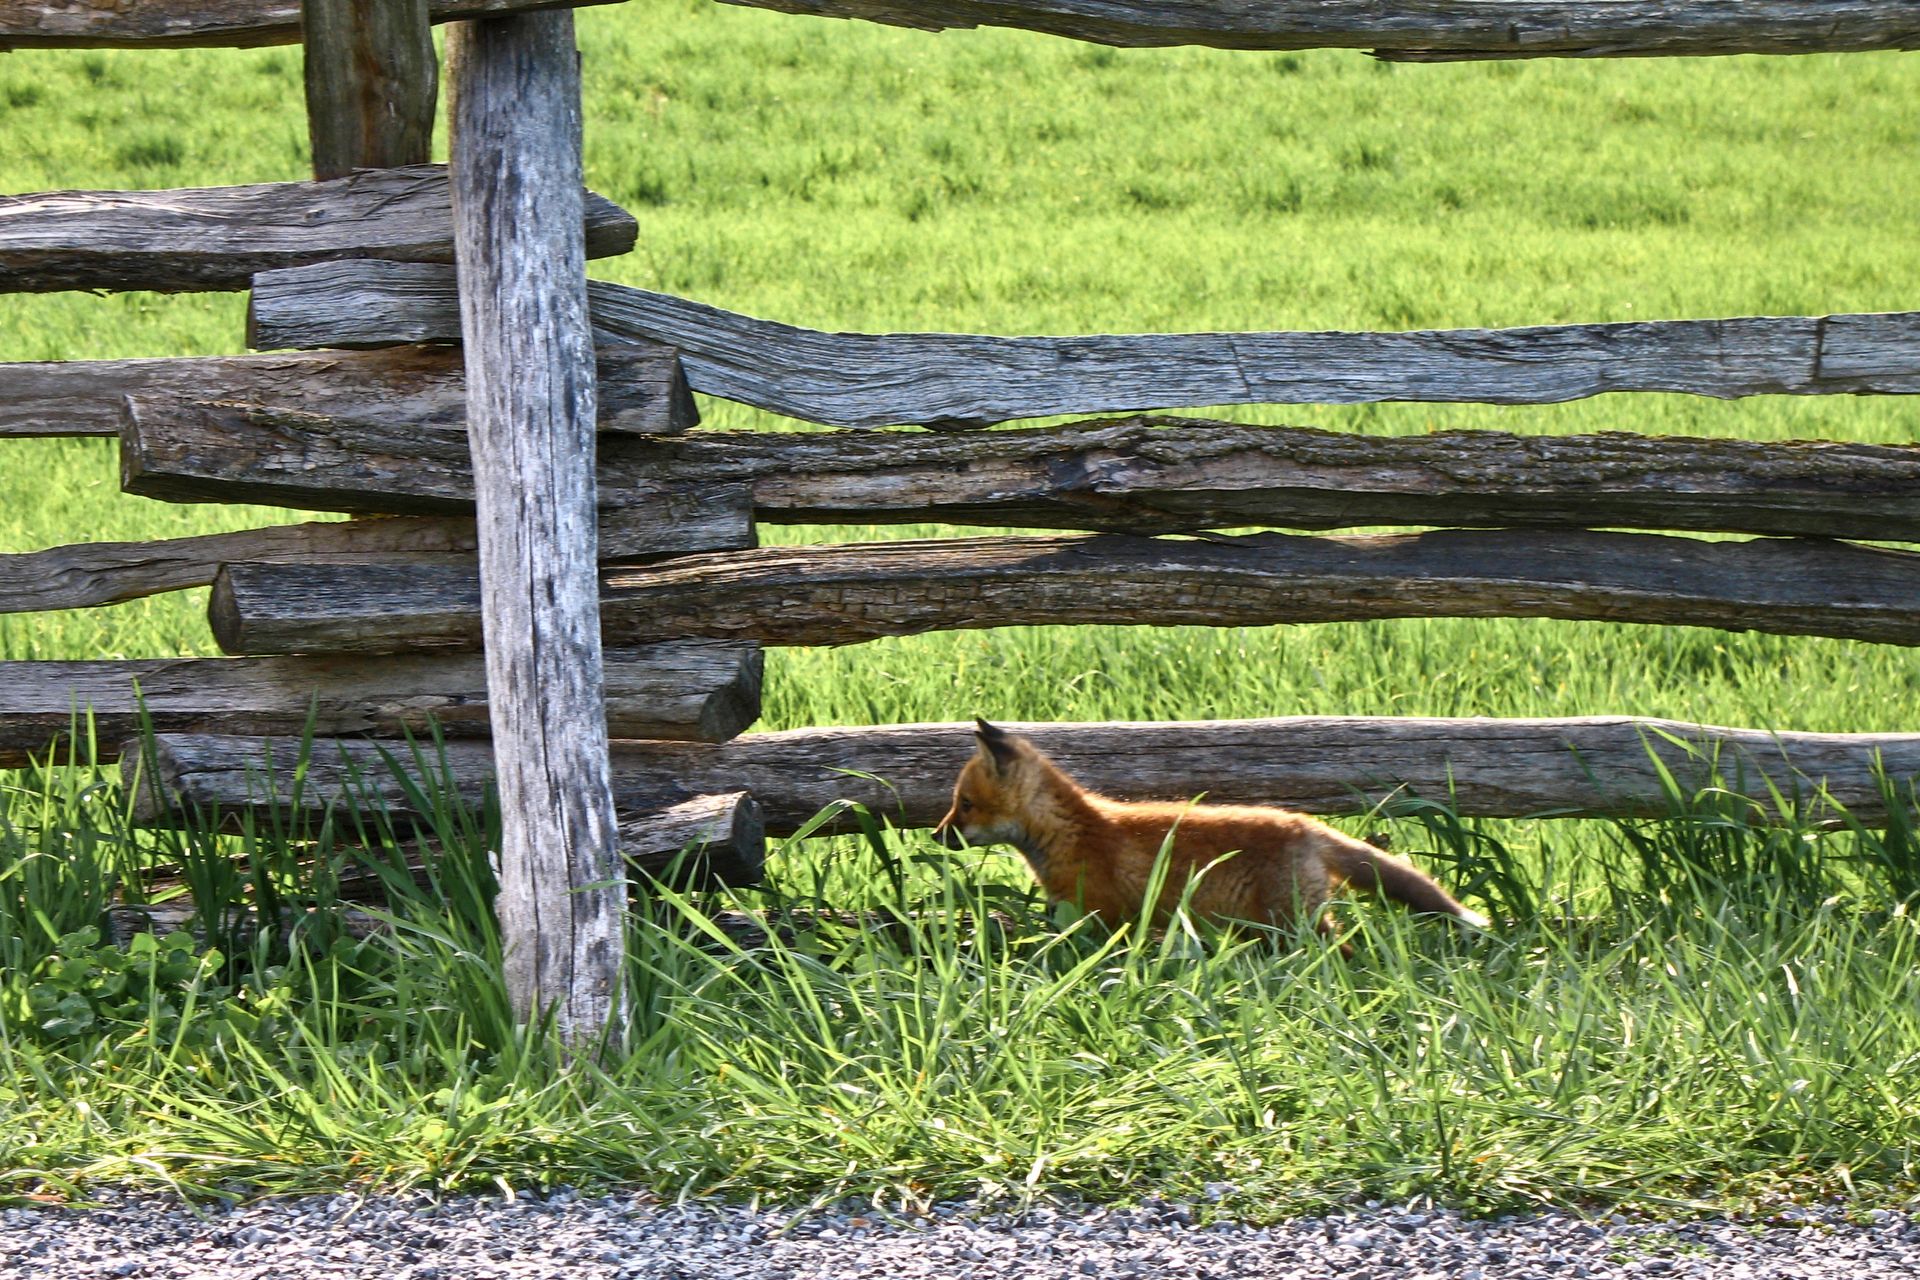 A young fox running through grass along a fence and road.  